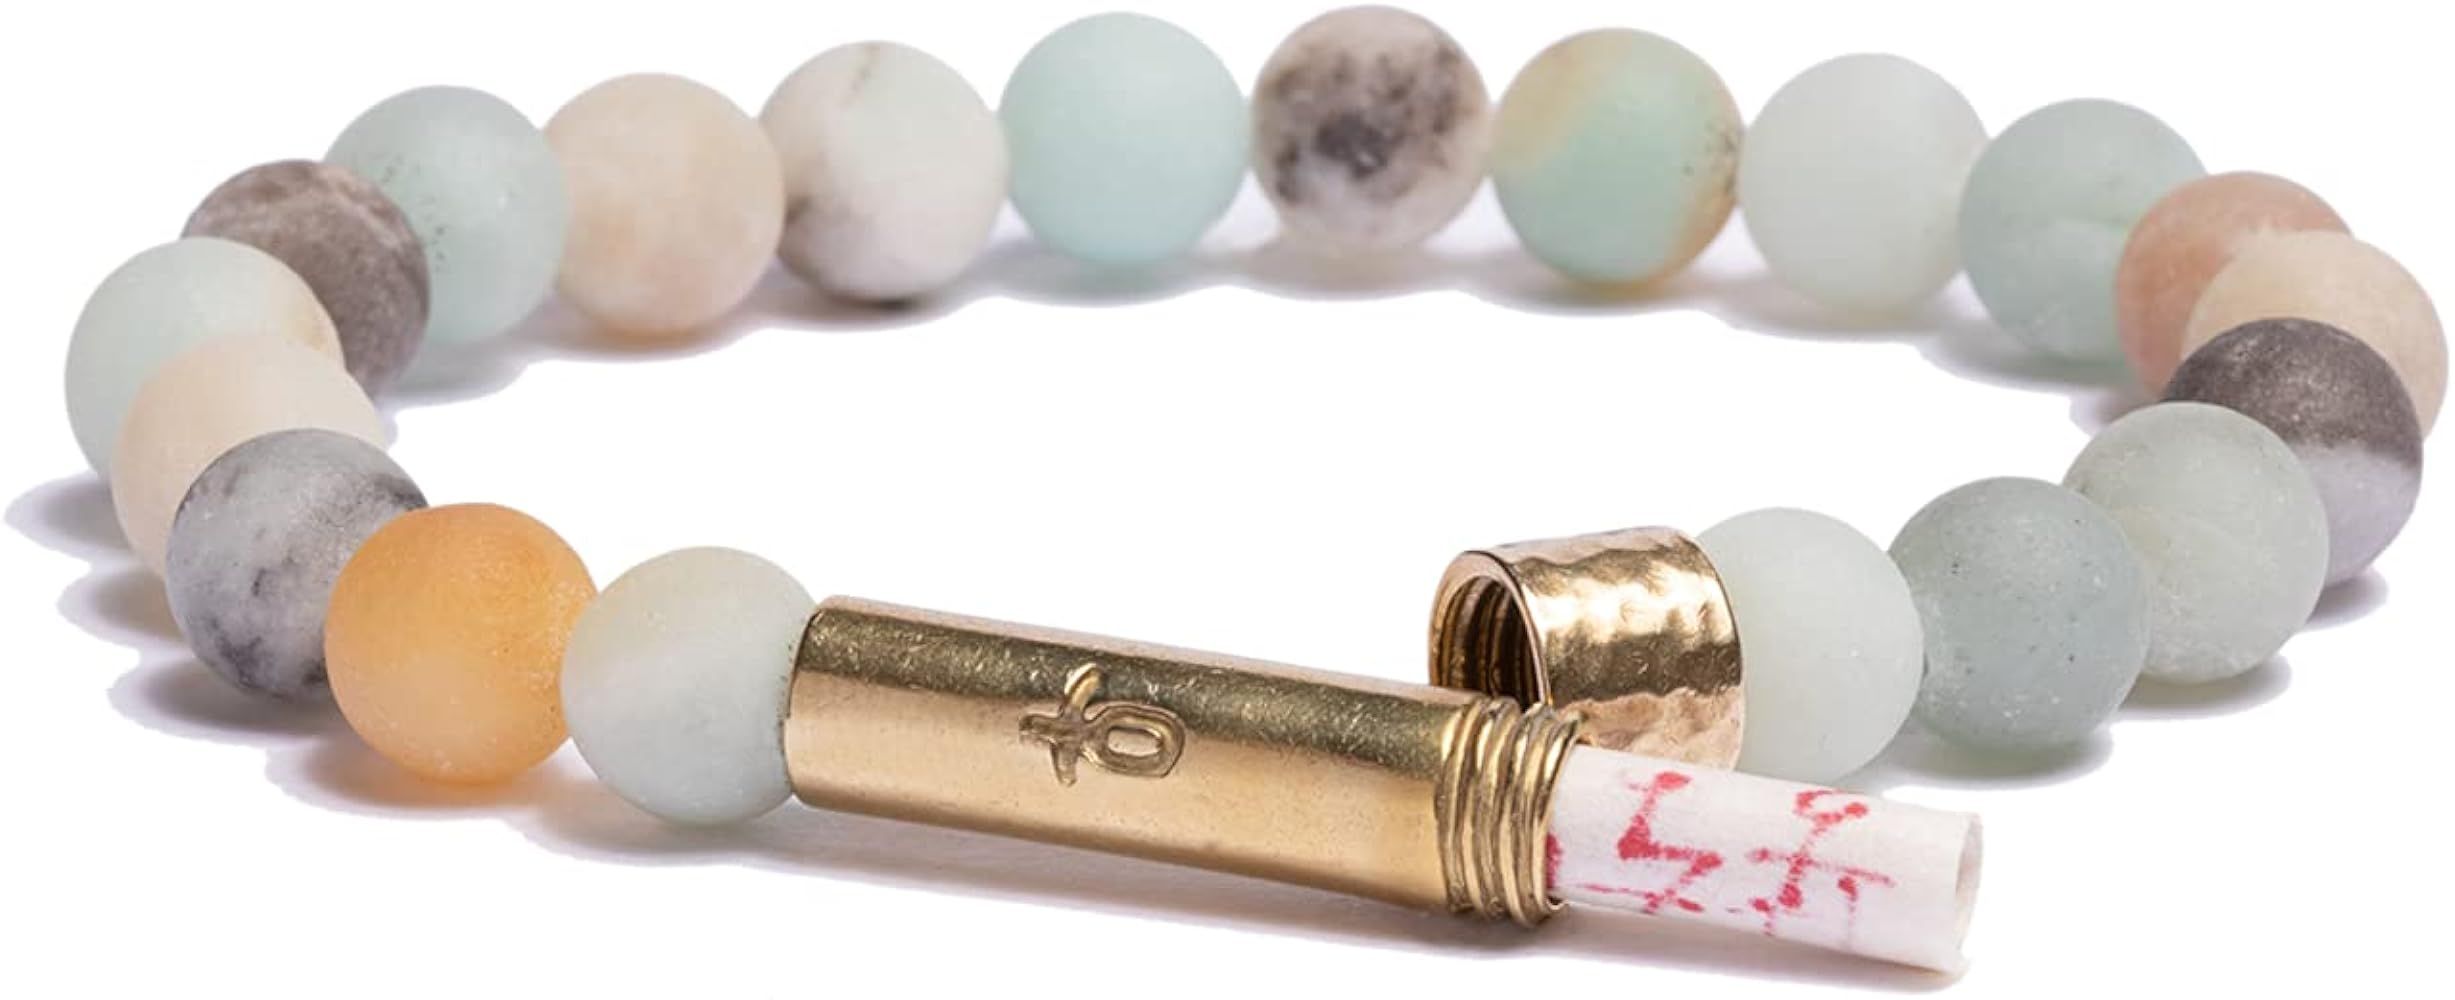 Wishbeads Intention Bracelet for Women - Write your wish, tuck it inside, and wear as a daily remind | Amazon (US)